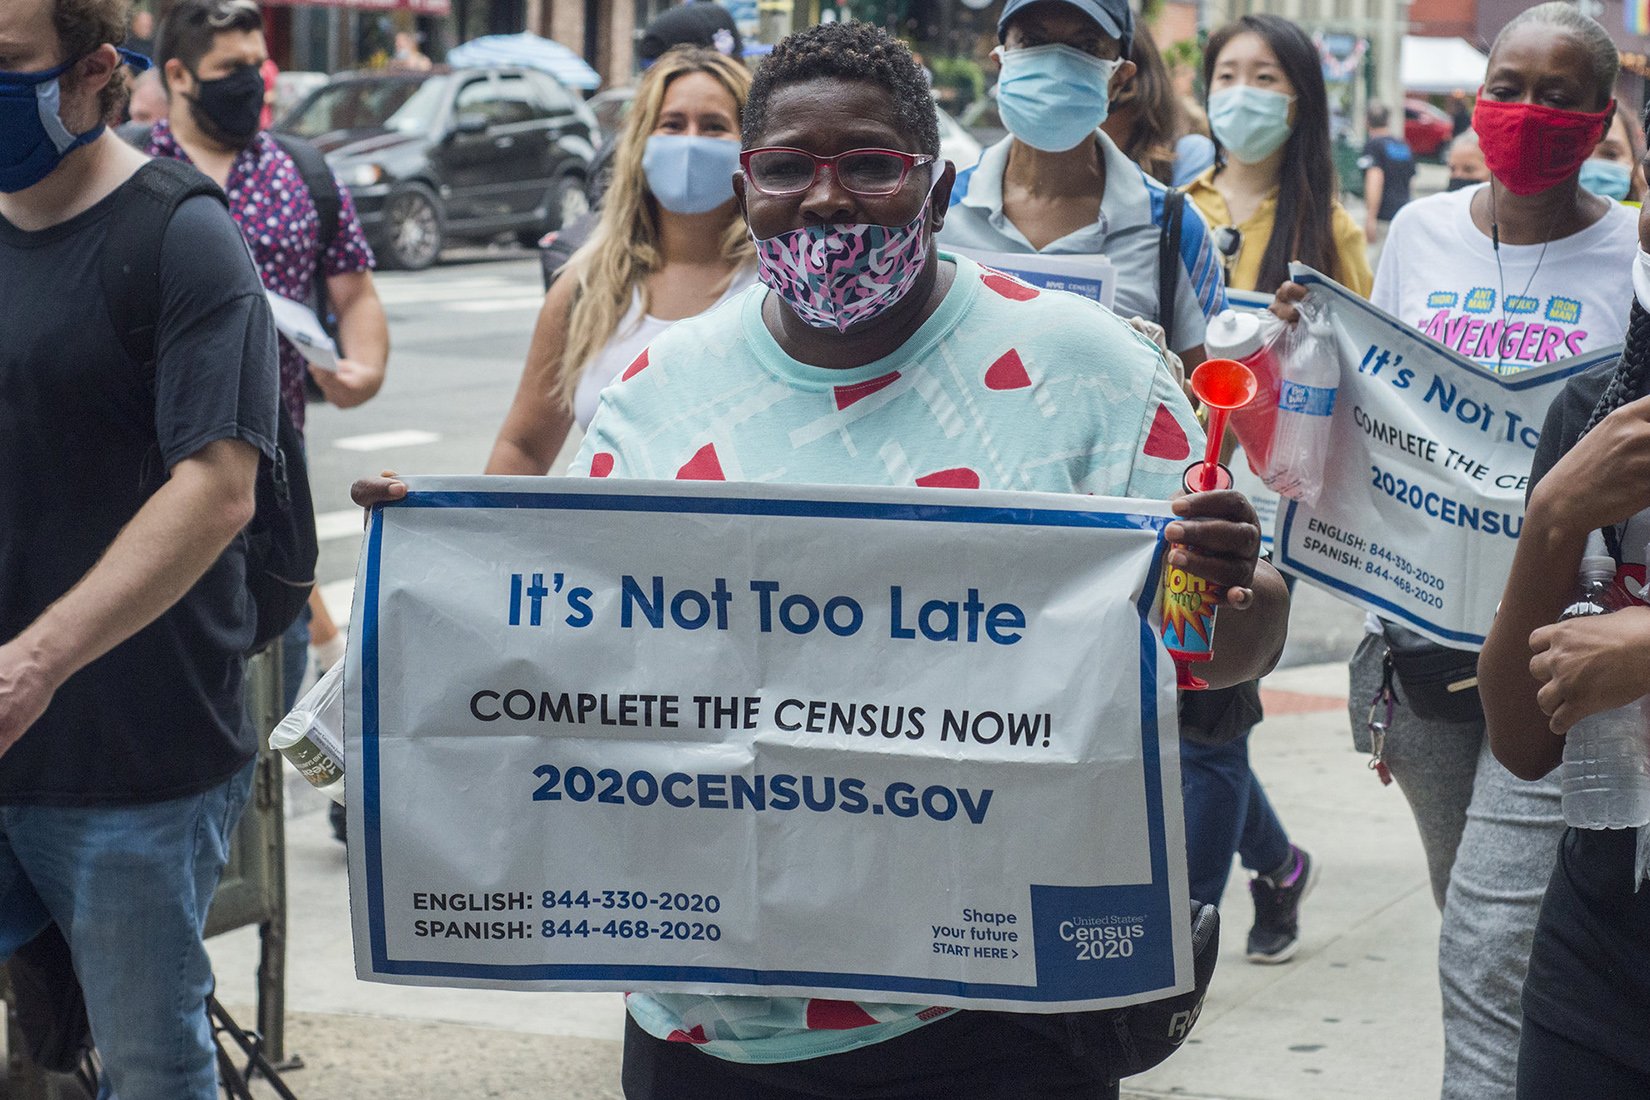 A participant at the march holding a sign to the camera that says, "It's not too late, complete the census now! 2020census.gov"